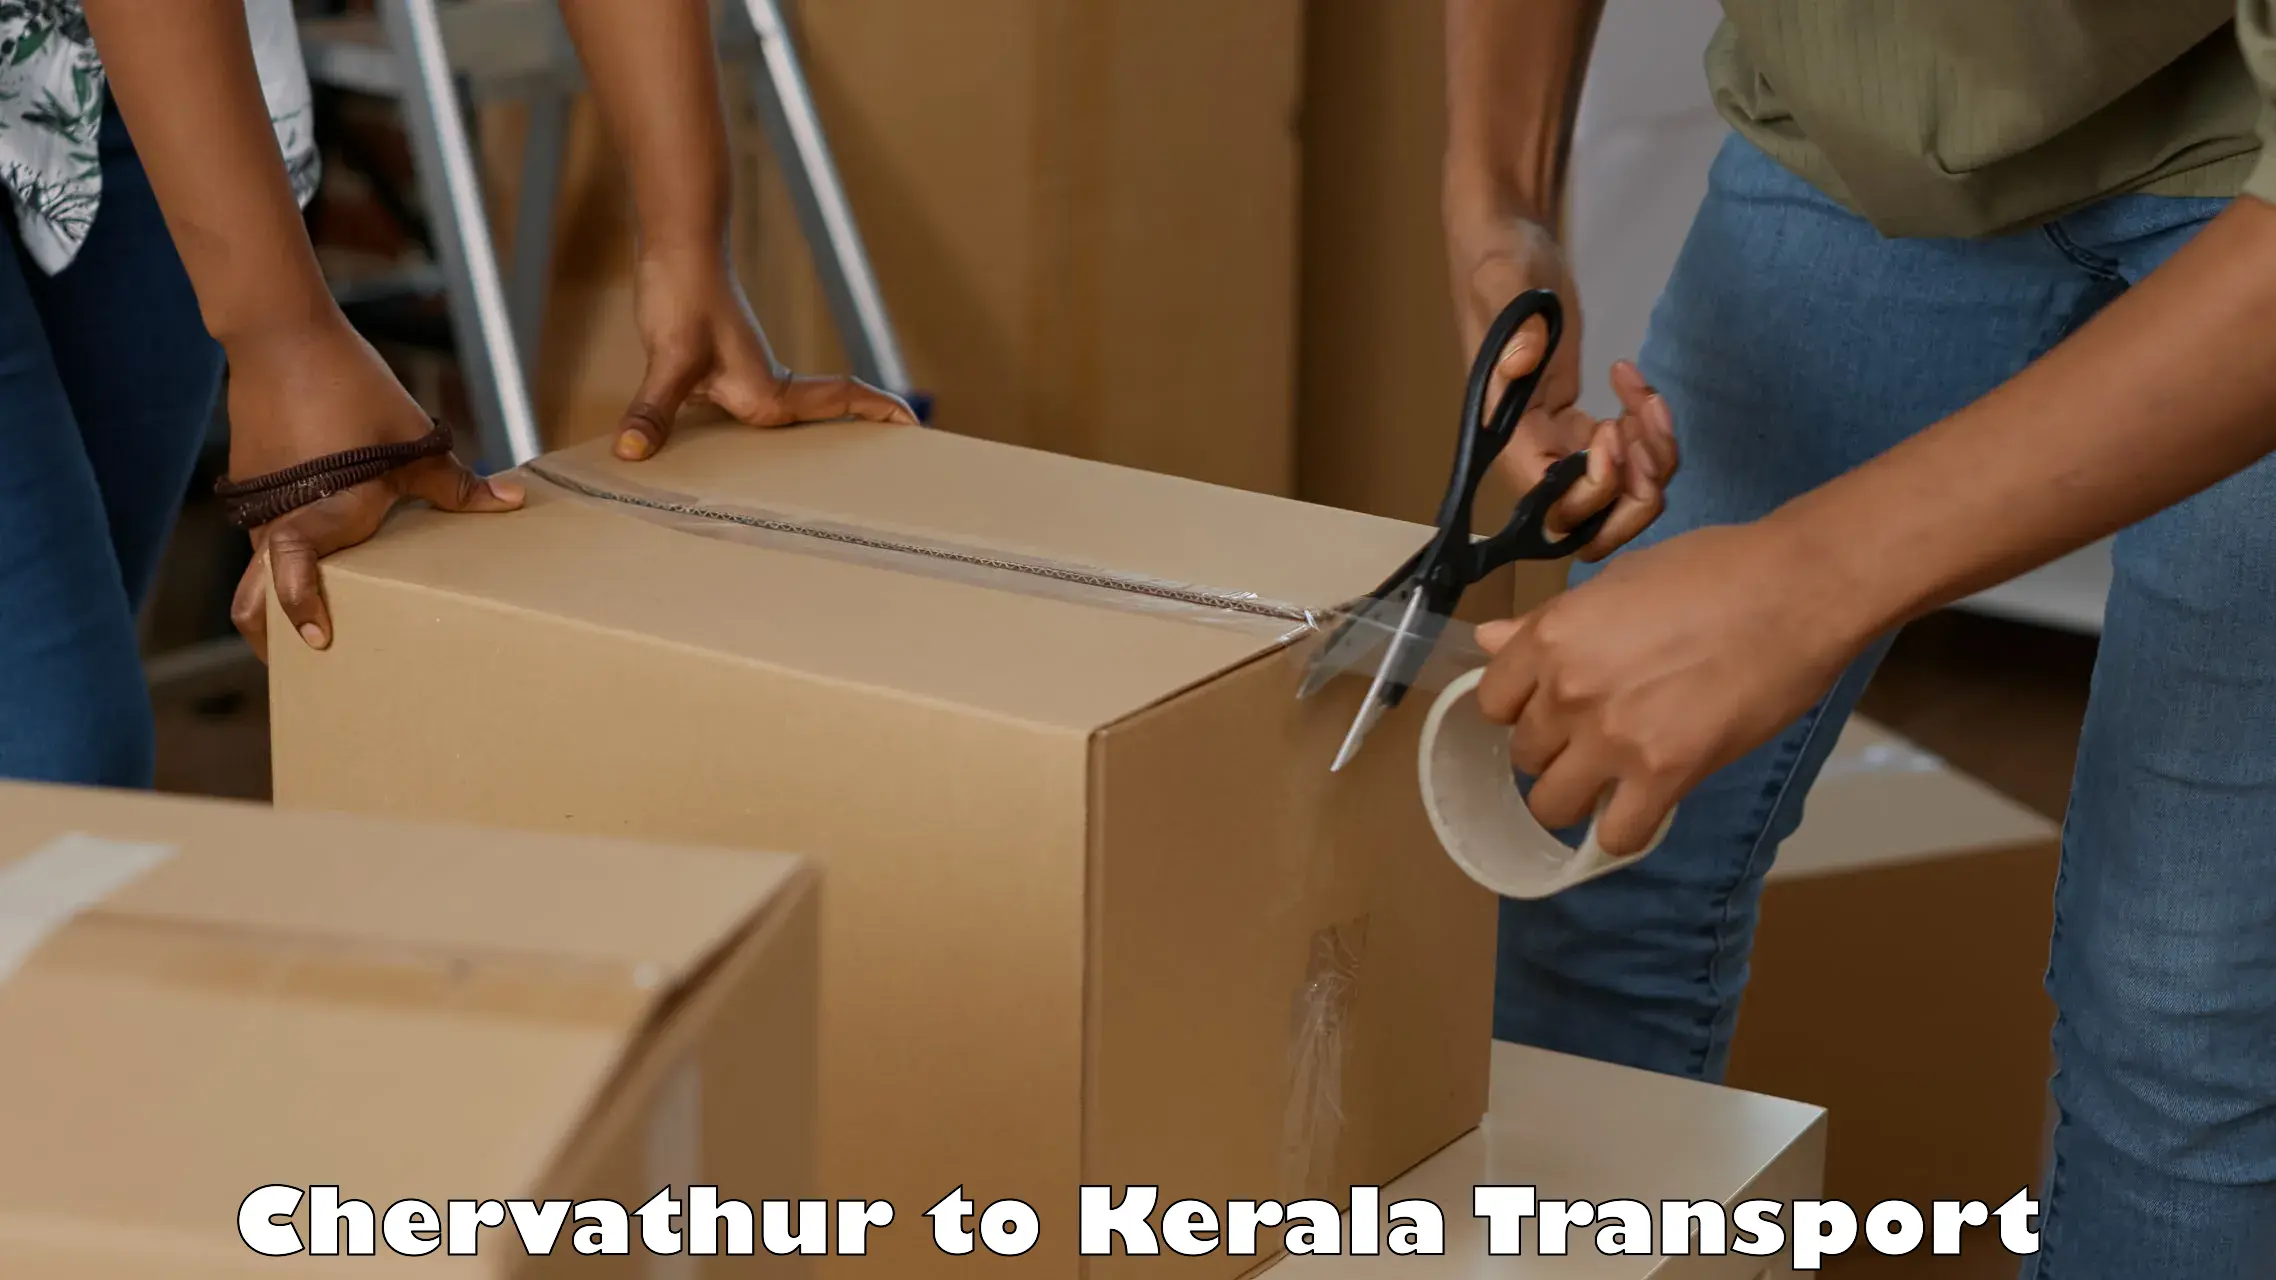 Package delivery services Chervathur to Ernakulam